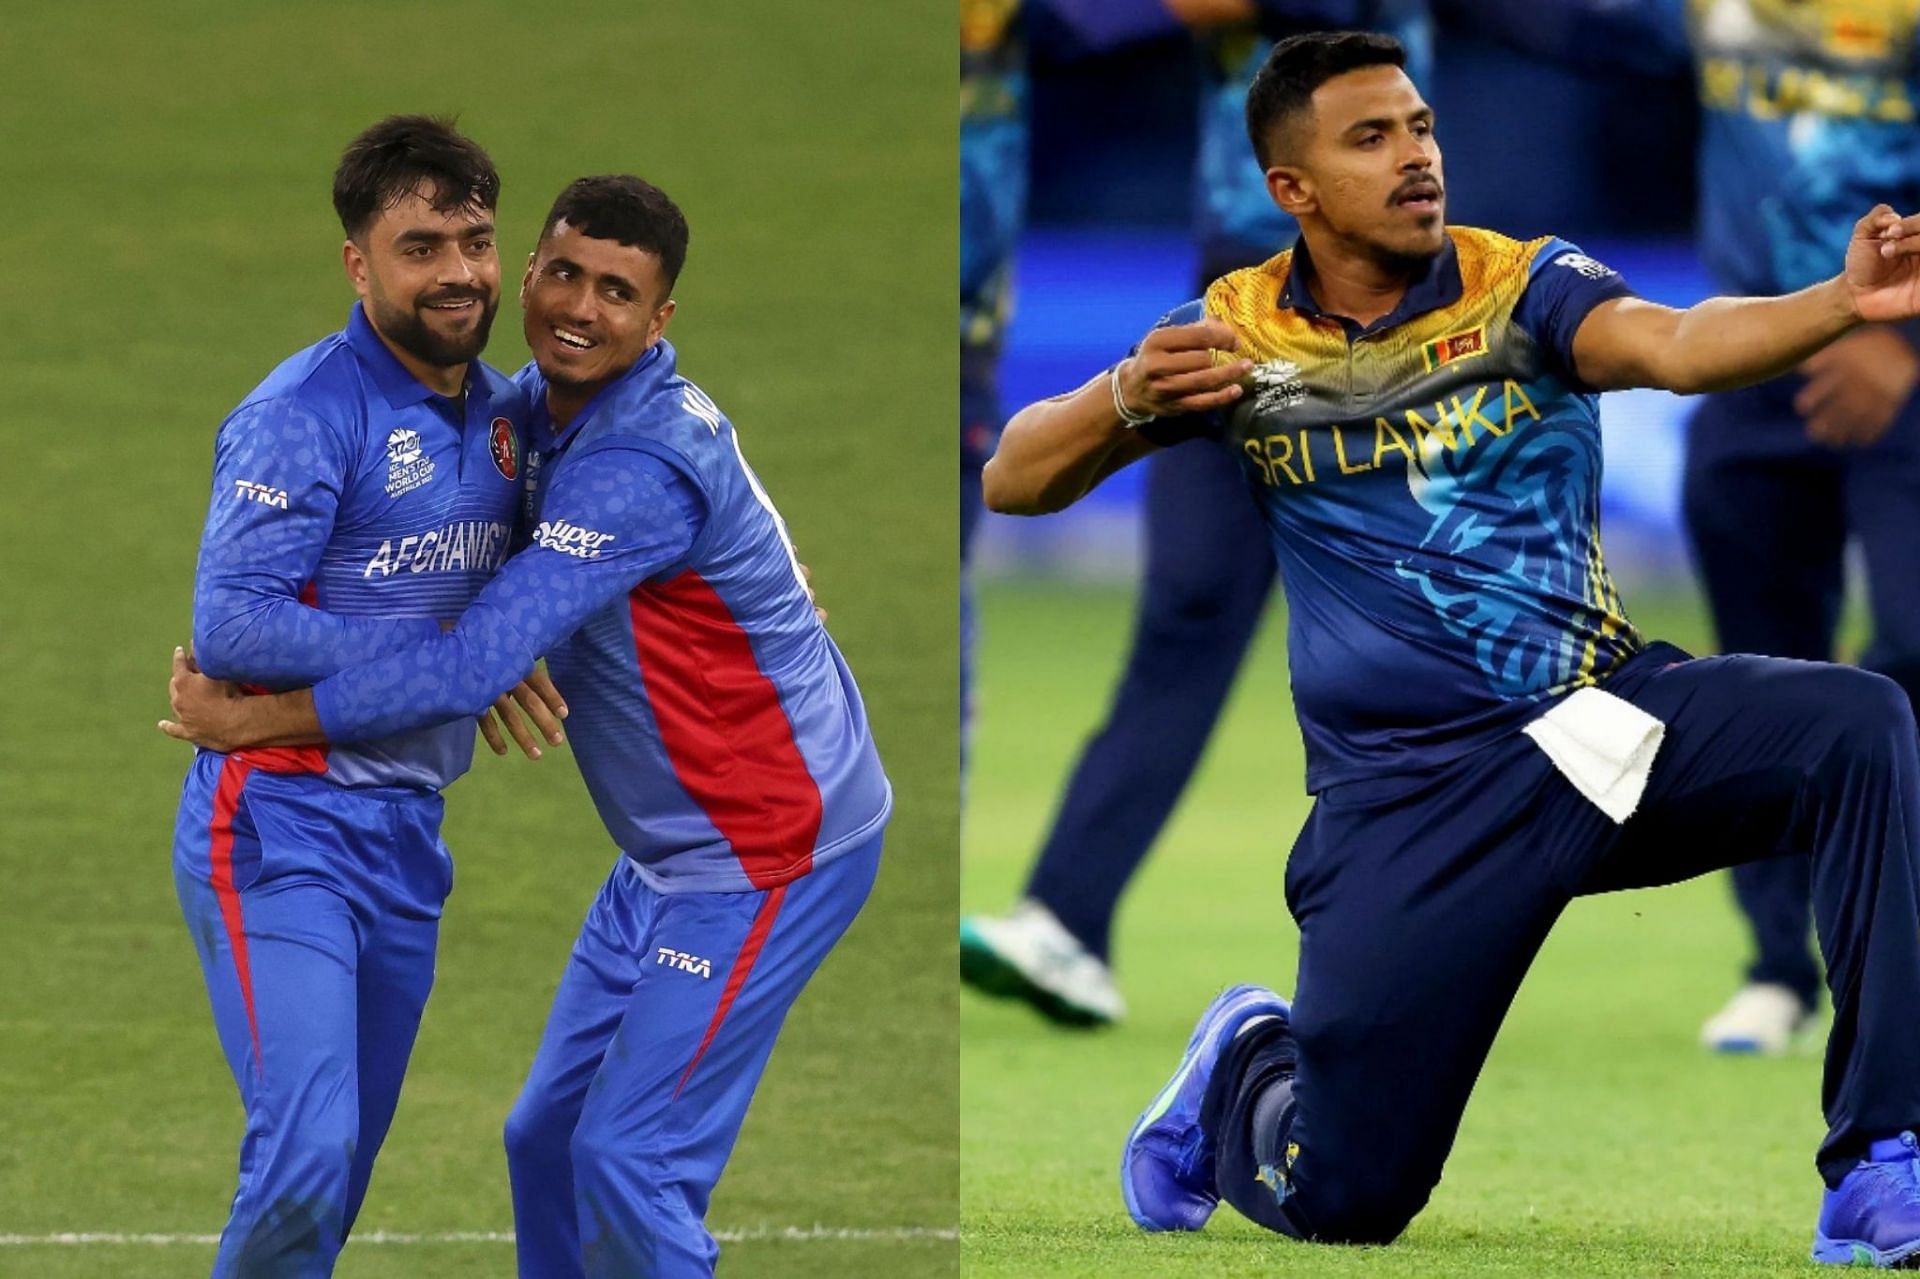 Sri Lanka are set to lock horns with Afghanistan in Match 32 of the T20 World Cup 2022 